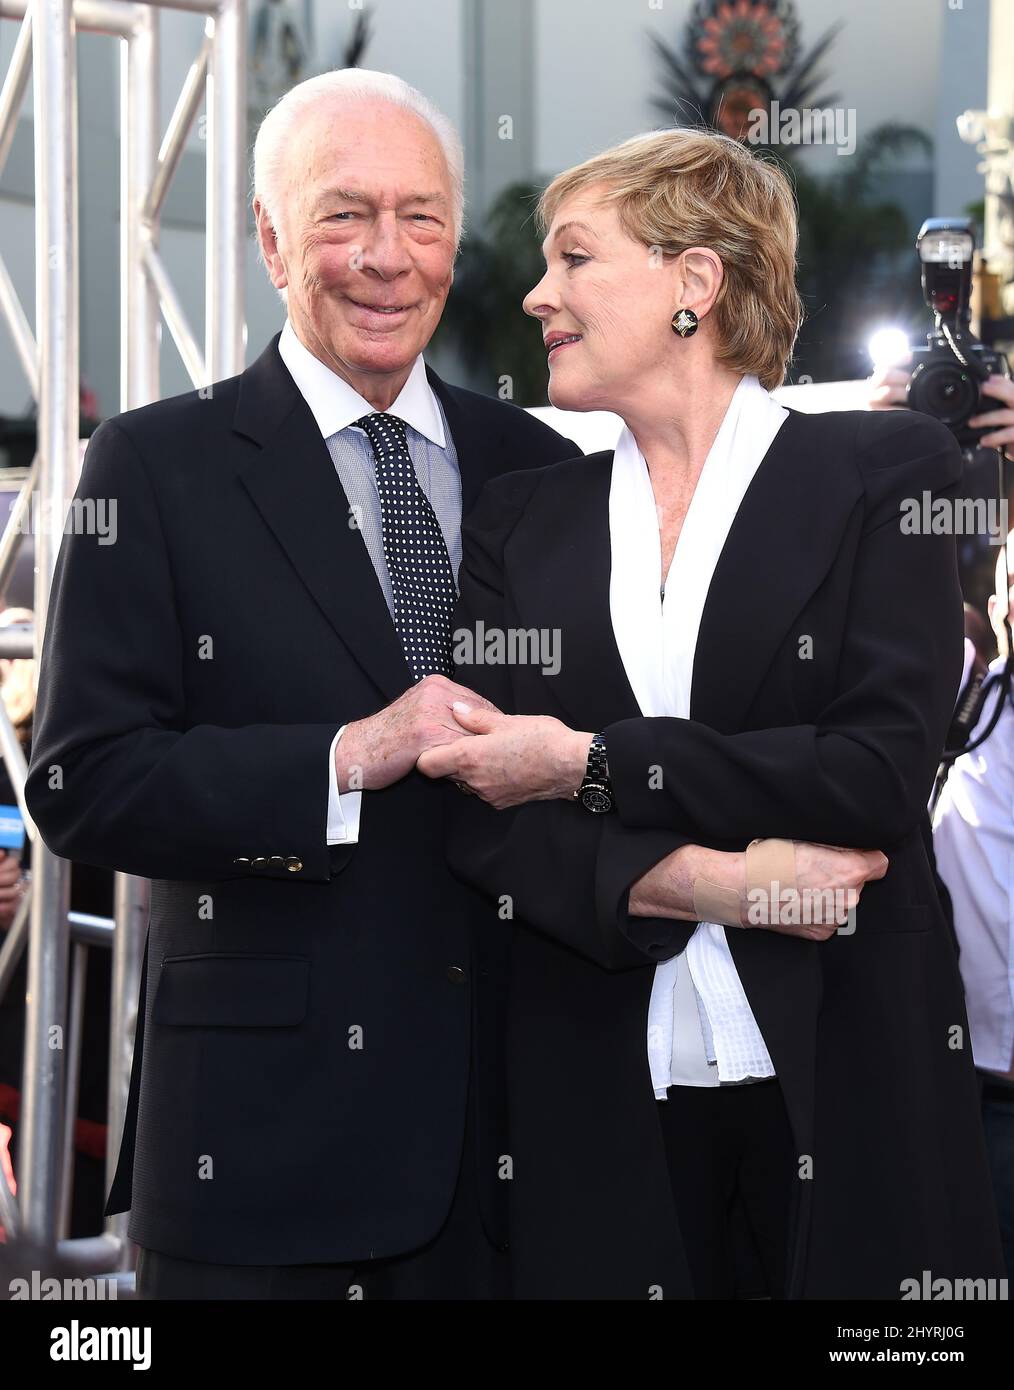 FILE PHOTO: Christopher Plummer, the Canadian-born actor who starred in The Sound of Music died on Friday morning at his home in Connecticut. He was 91. March 26, 2015 Hollywood, Ca. Christopher Plummer and Julie Andrews The 50th Anniversary screening of 'The Sound of Music' presented as the Opening Night Gala of the 2015 TCM Classic Film Festival held at TCL Chinese Theatre Chase Rollins / AFF-USA.COM Stock Photo